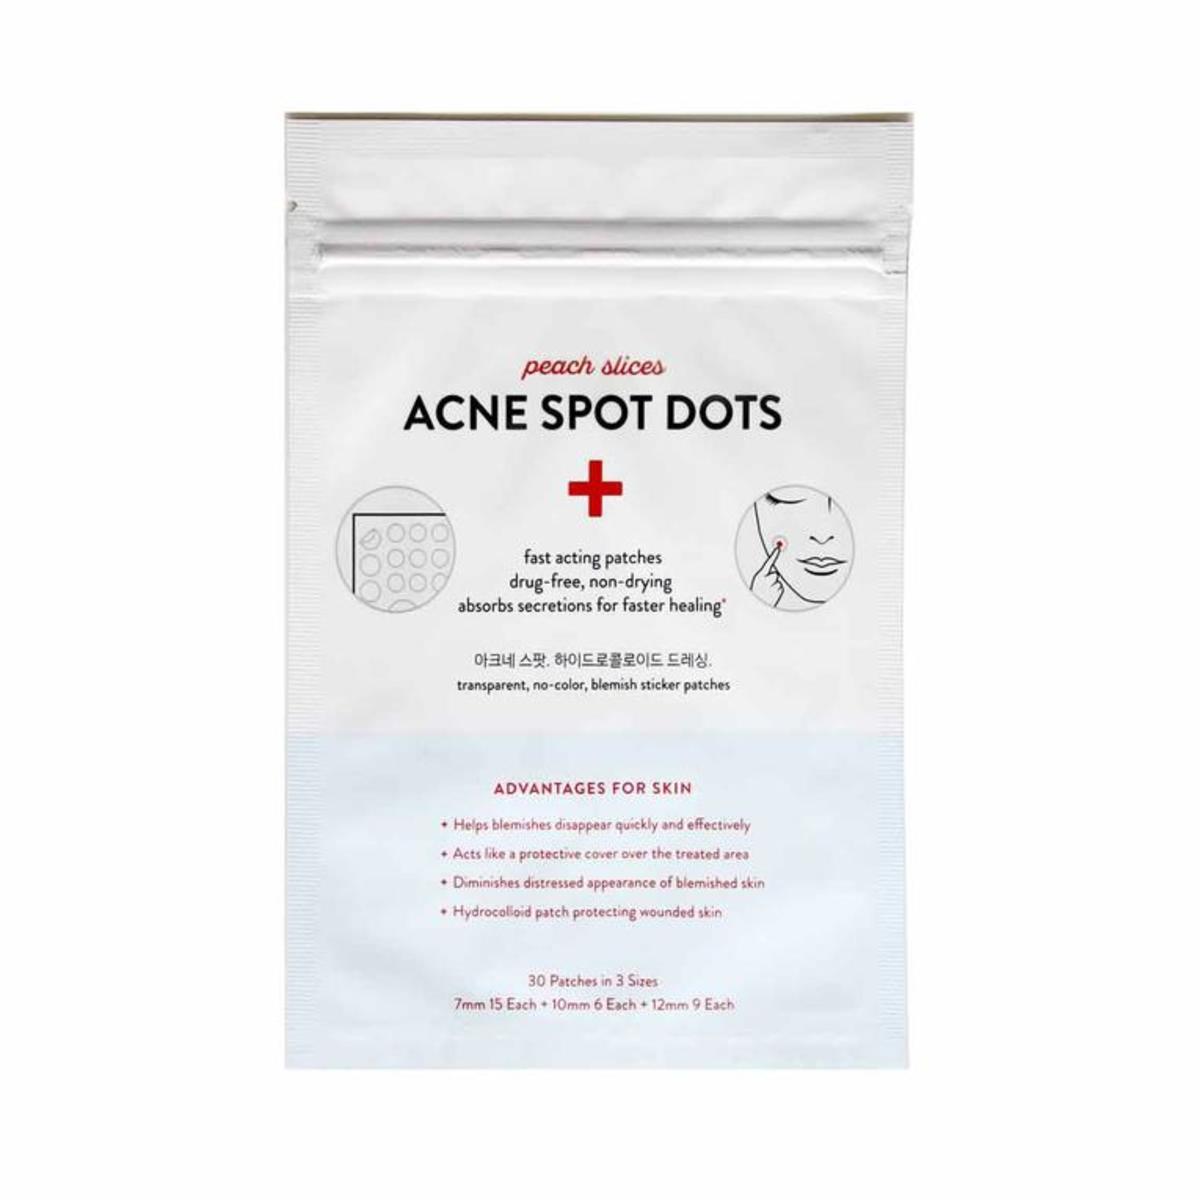 Peach Slices Acne Spot Dots, $4.49, available at Peach & Lily.